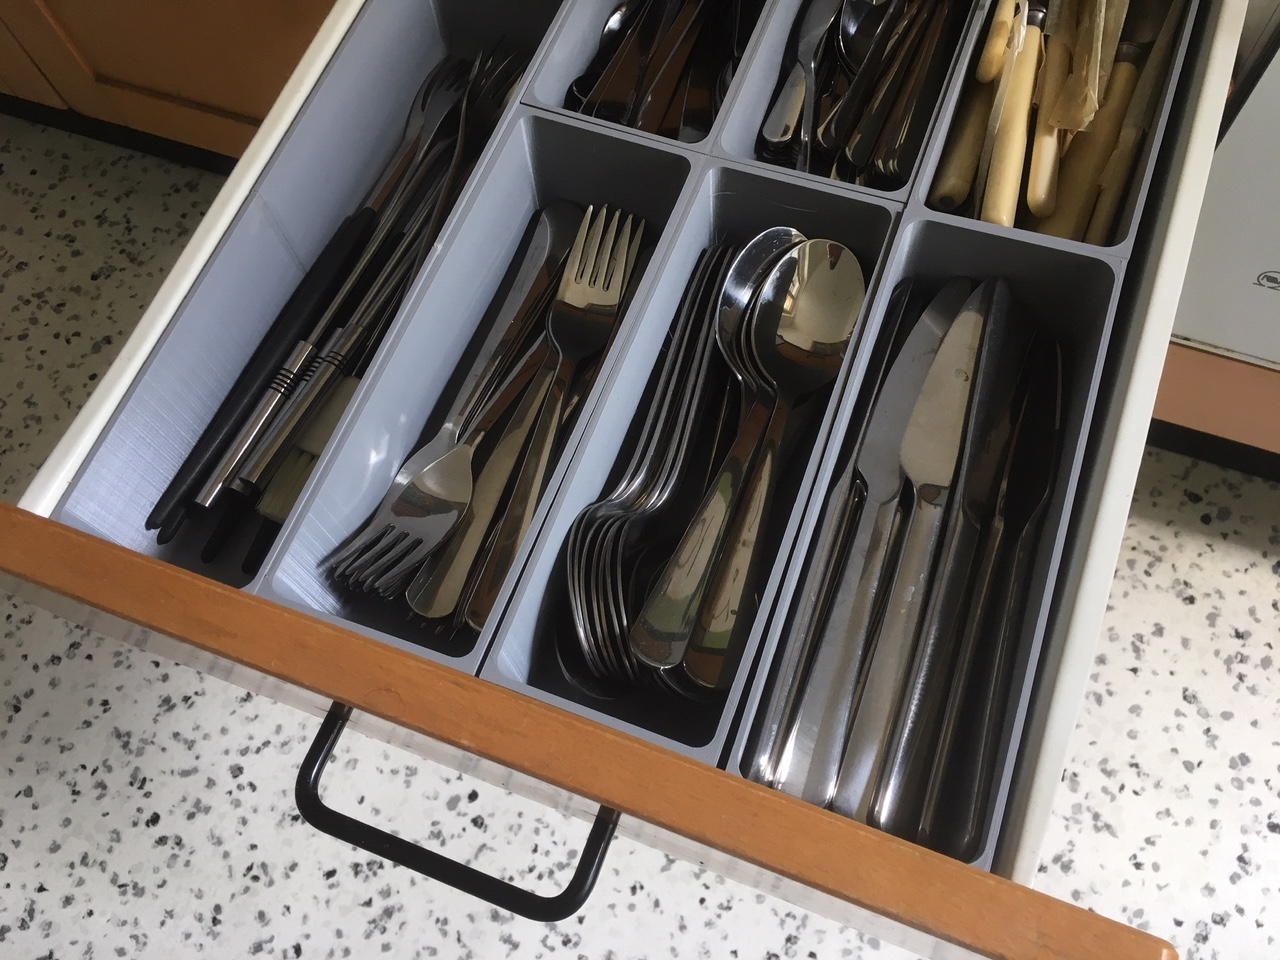 Cutlery trays for drawers